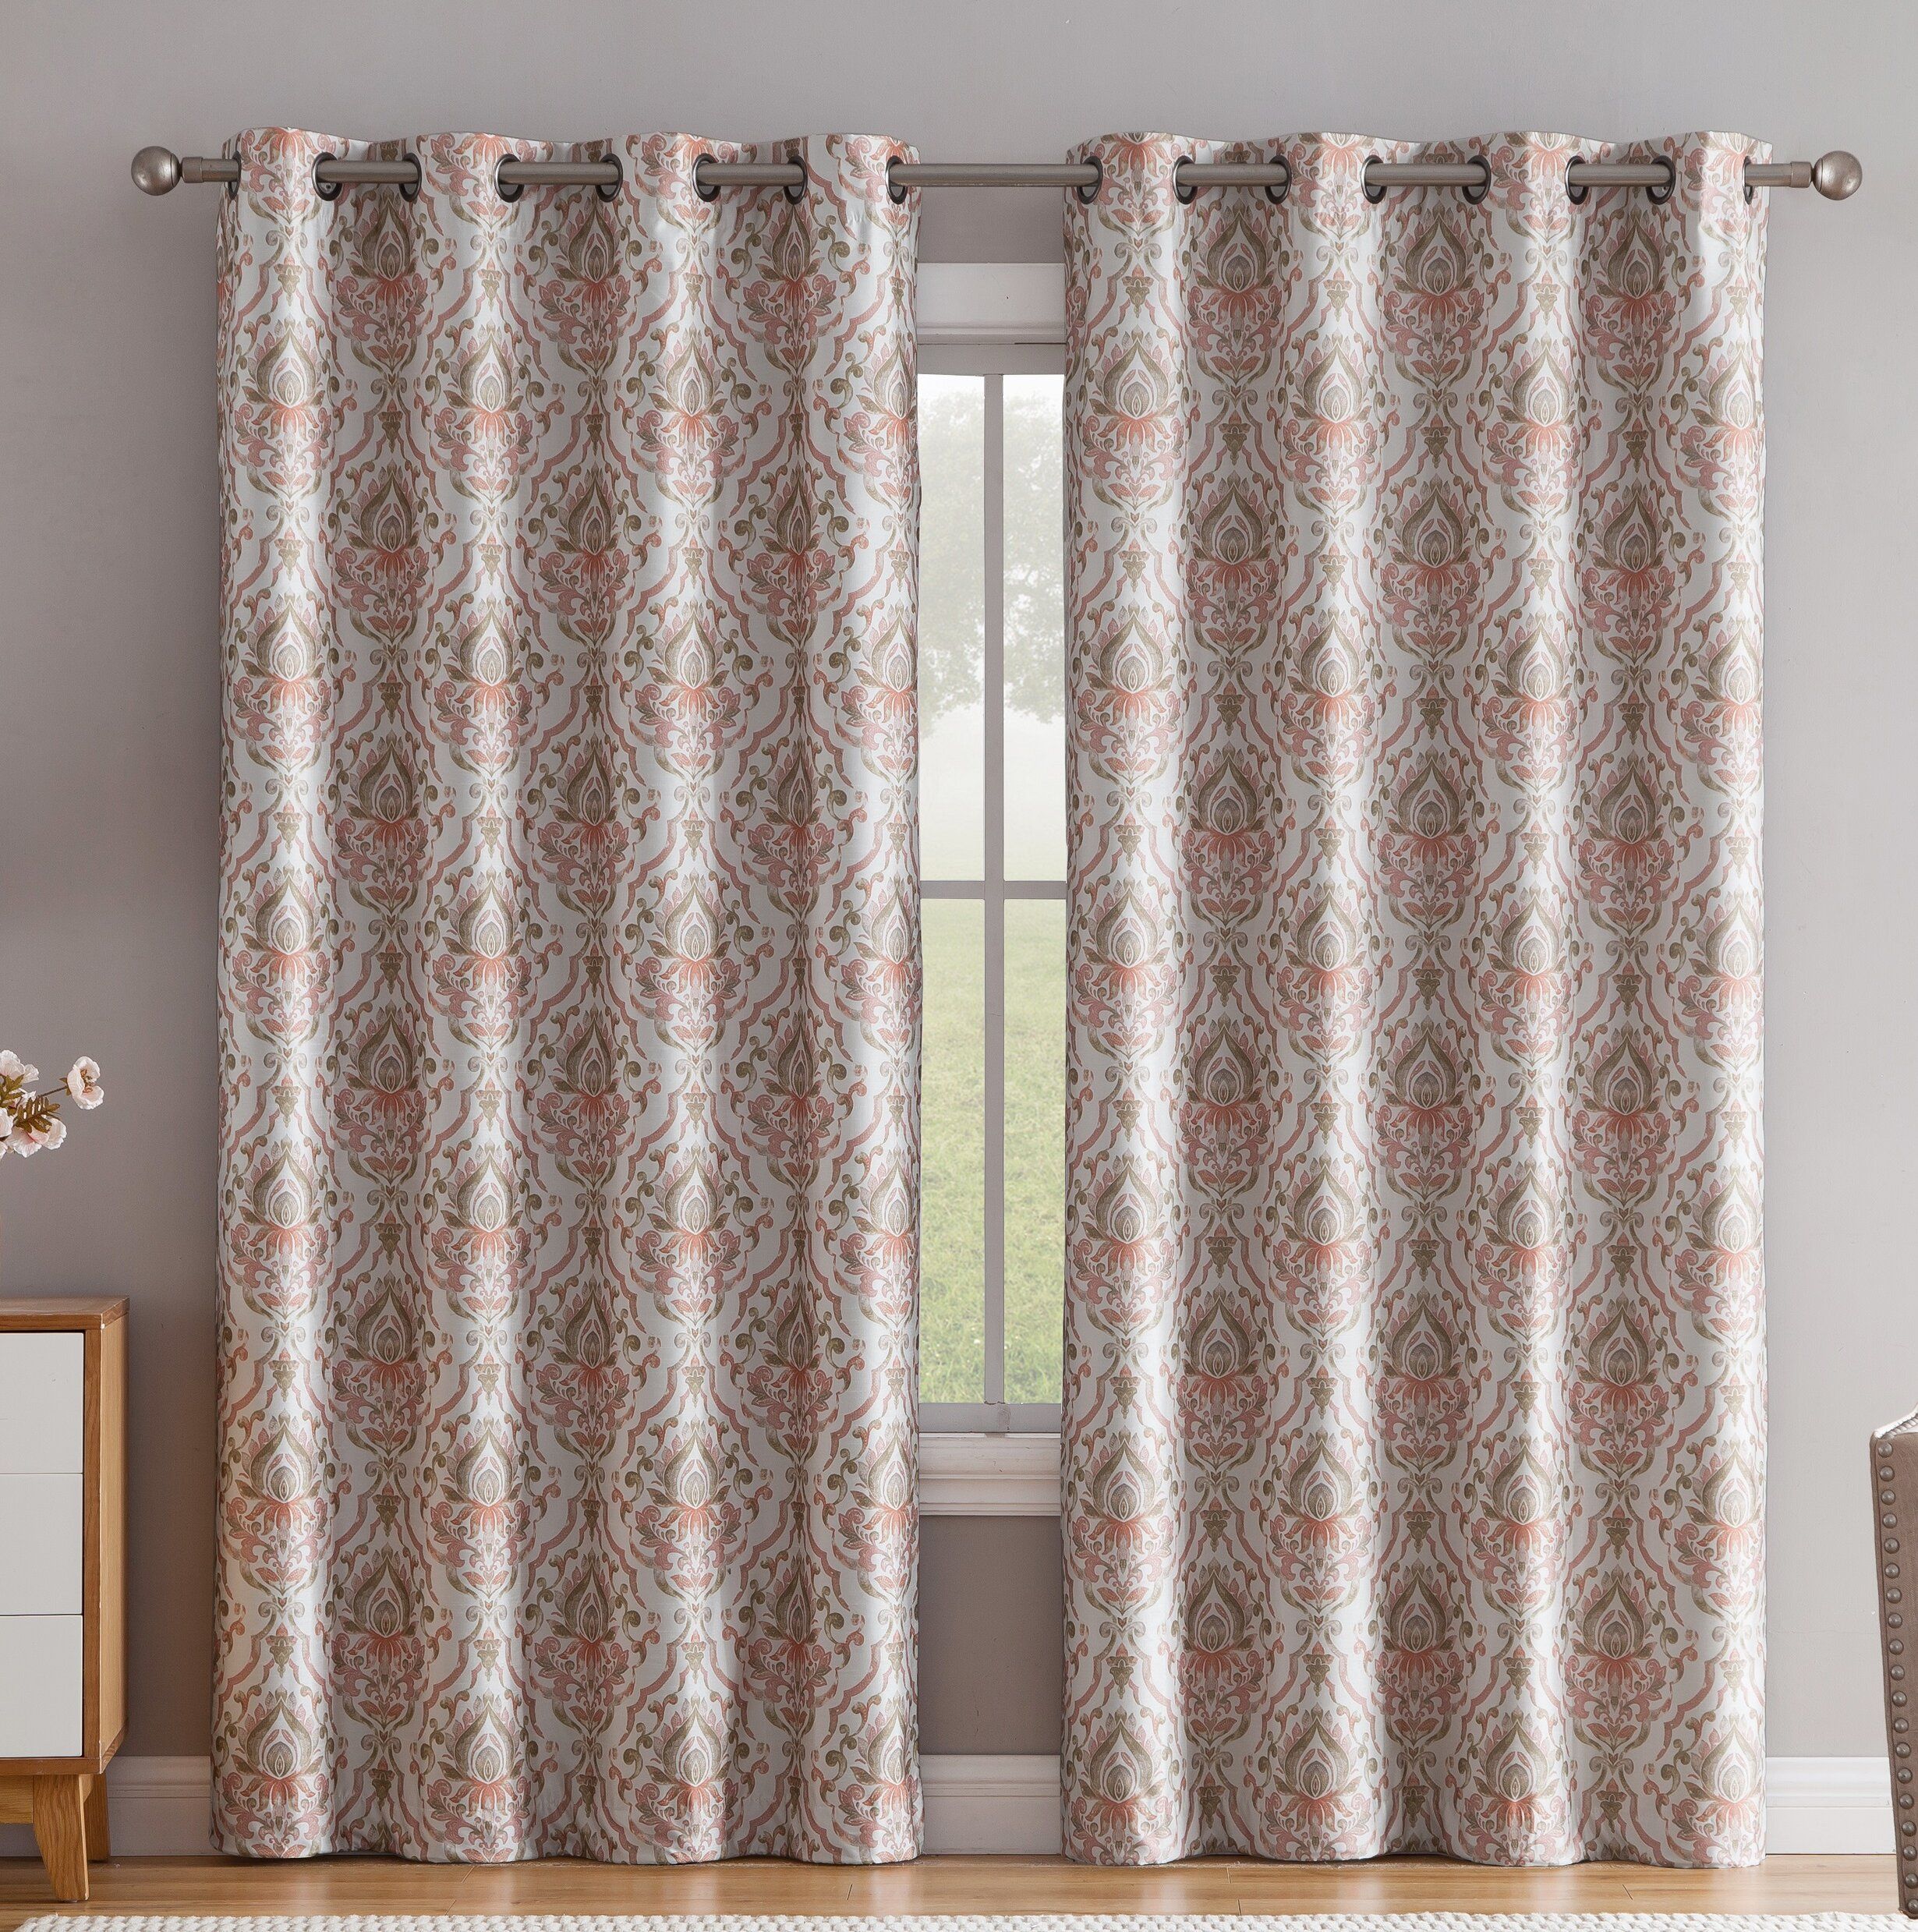 Brayden Studio Kempner Damask Max Blackout Thermal Grommet Intended For Duran Thermal Insulated Blackout Grommet Curtain Panels (View 12 of 20)